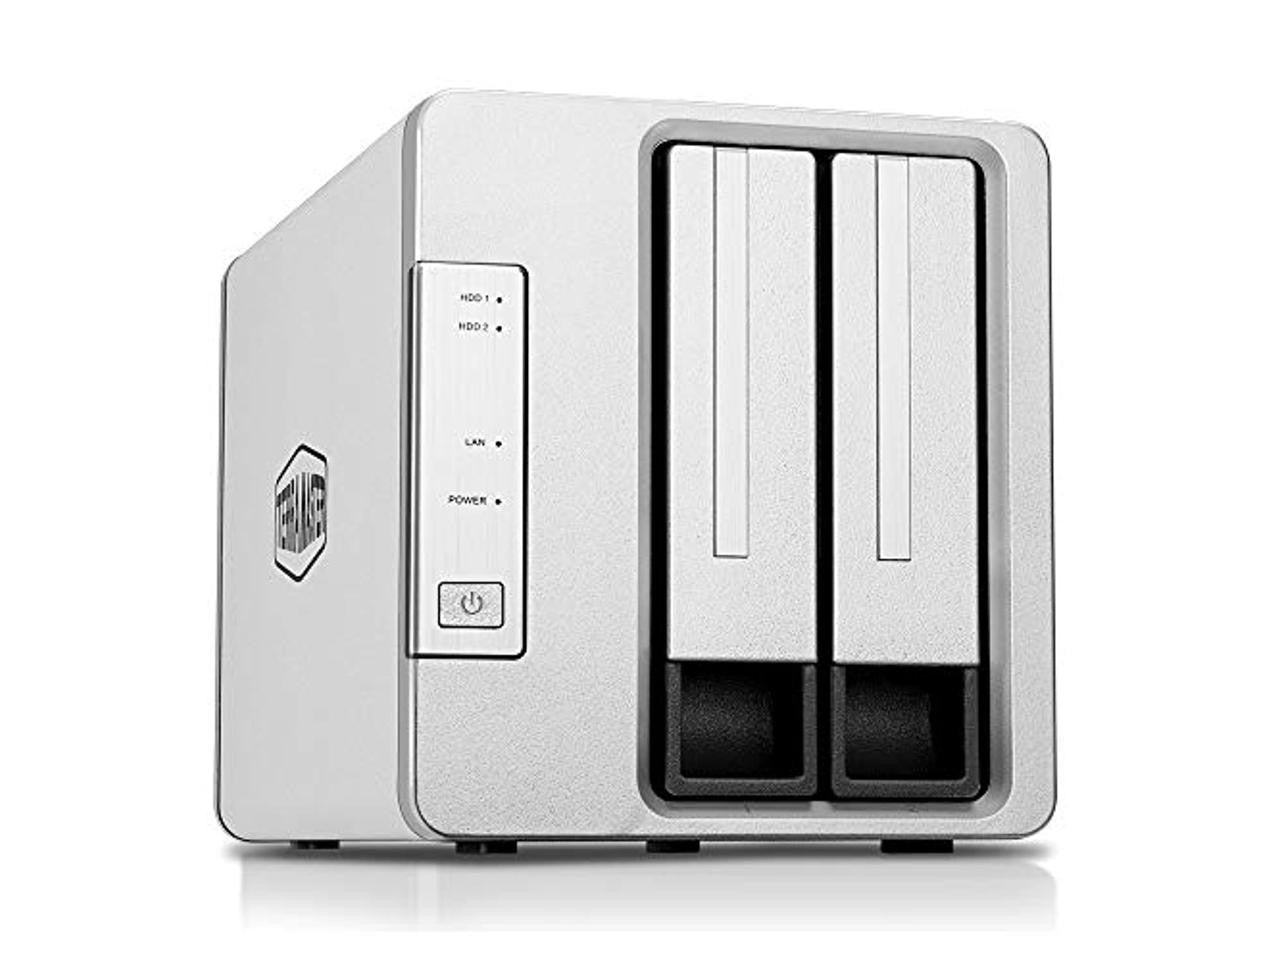 TerraMaster F2-210 2-Bay Home NAS with 16TB (2 x 8TB) of Seagate Ironwolf NAS Drives Fully Assembled and Tested